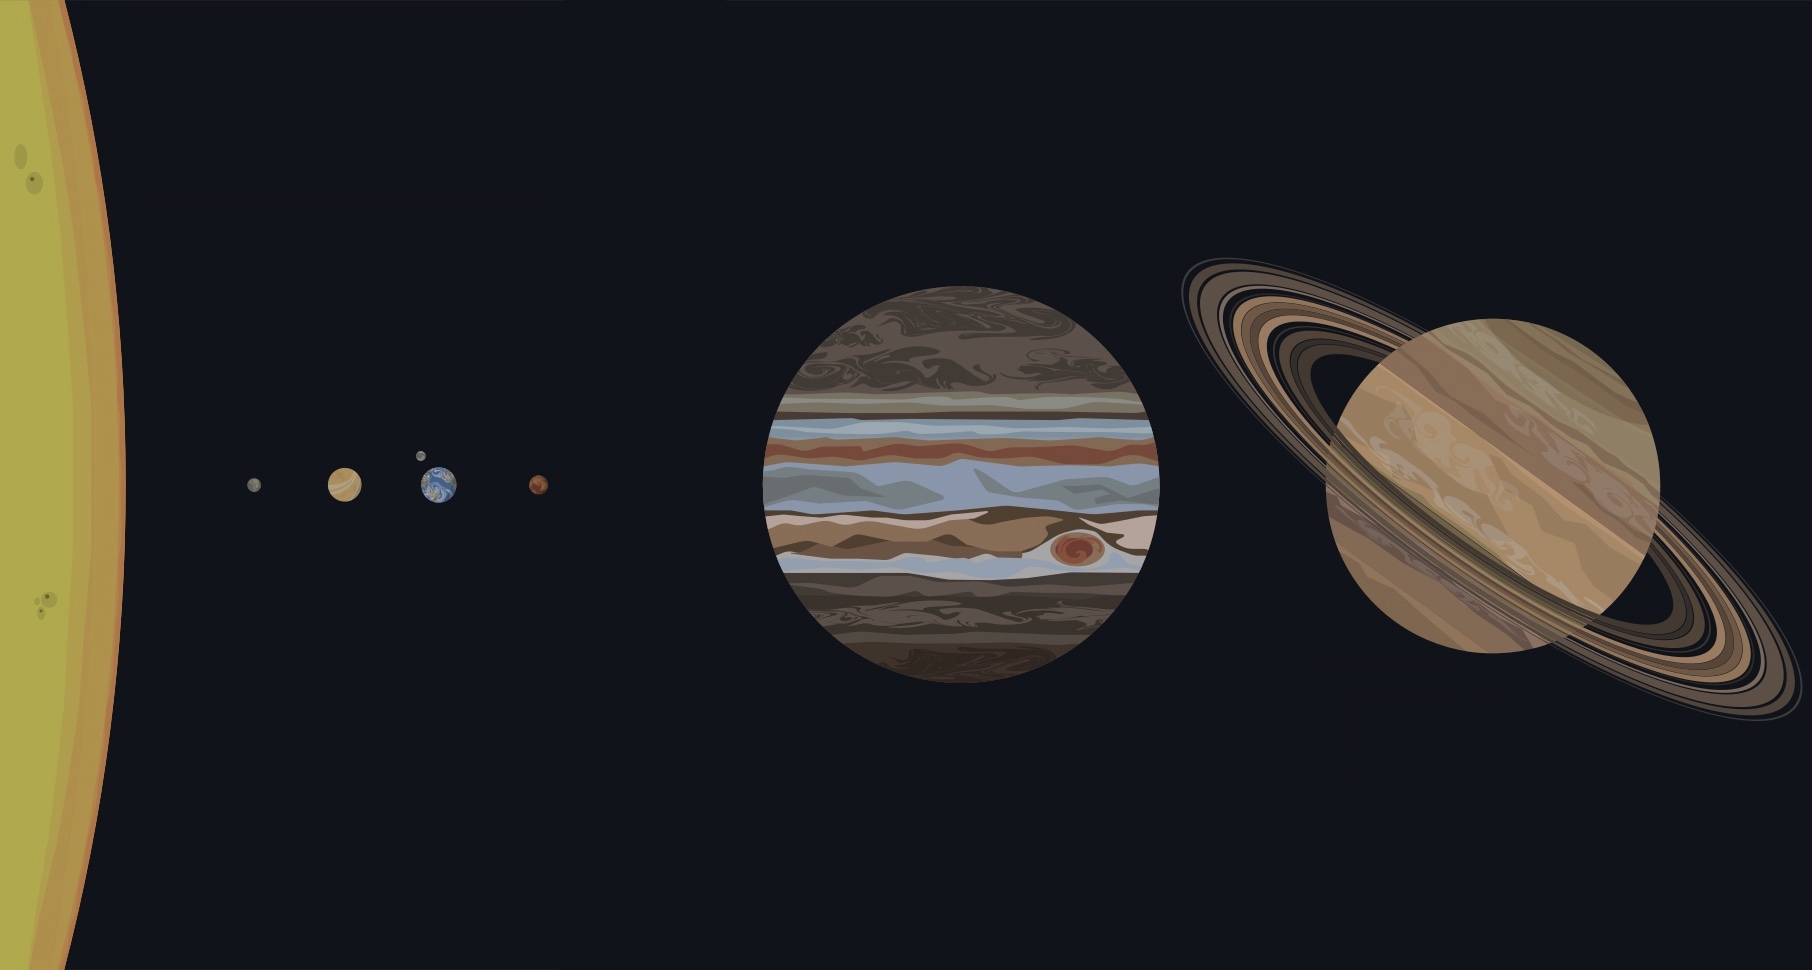 https://commons.wikimedia.org/wiki/File:The_Solar_System.svg